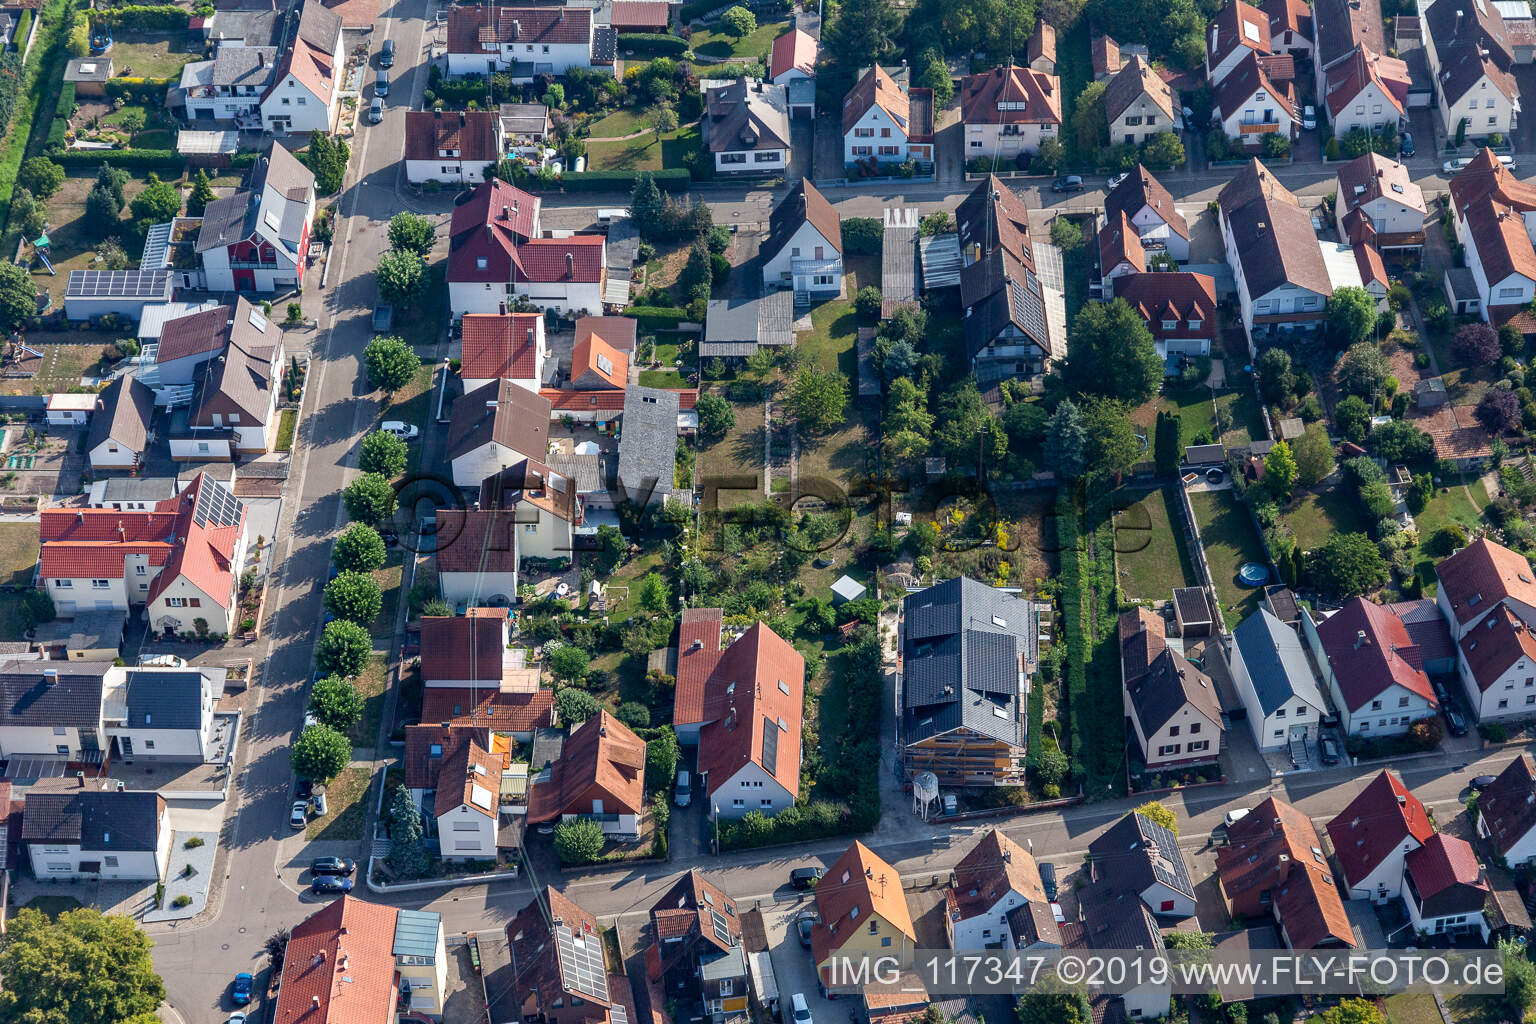 Settlement in Kandel in the state Rhineland-Palatinate, Germany seen from above